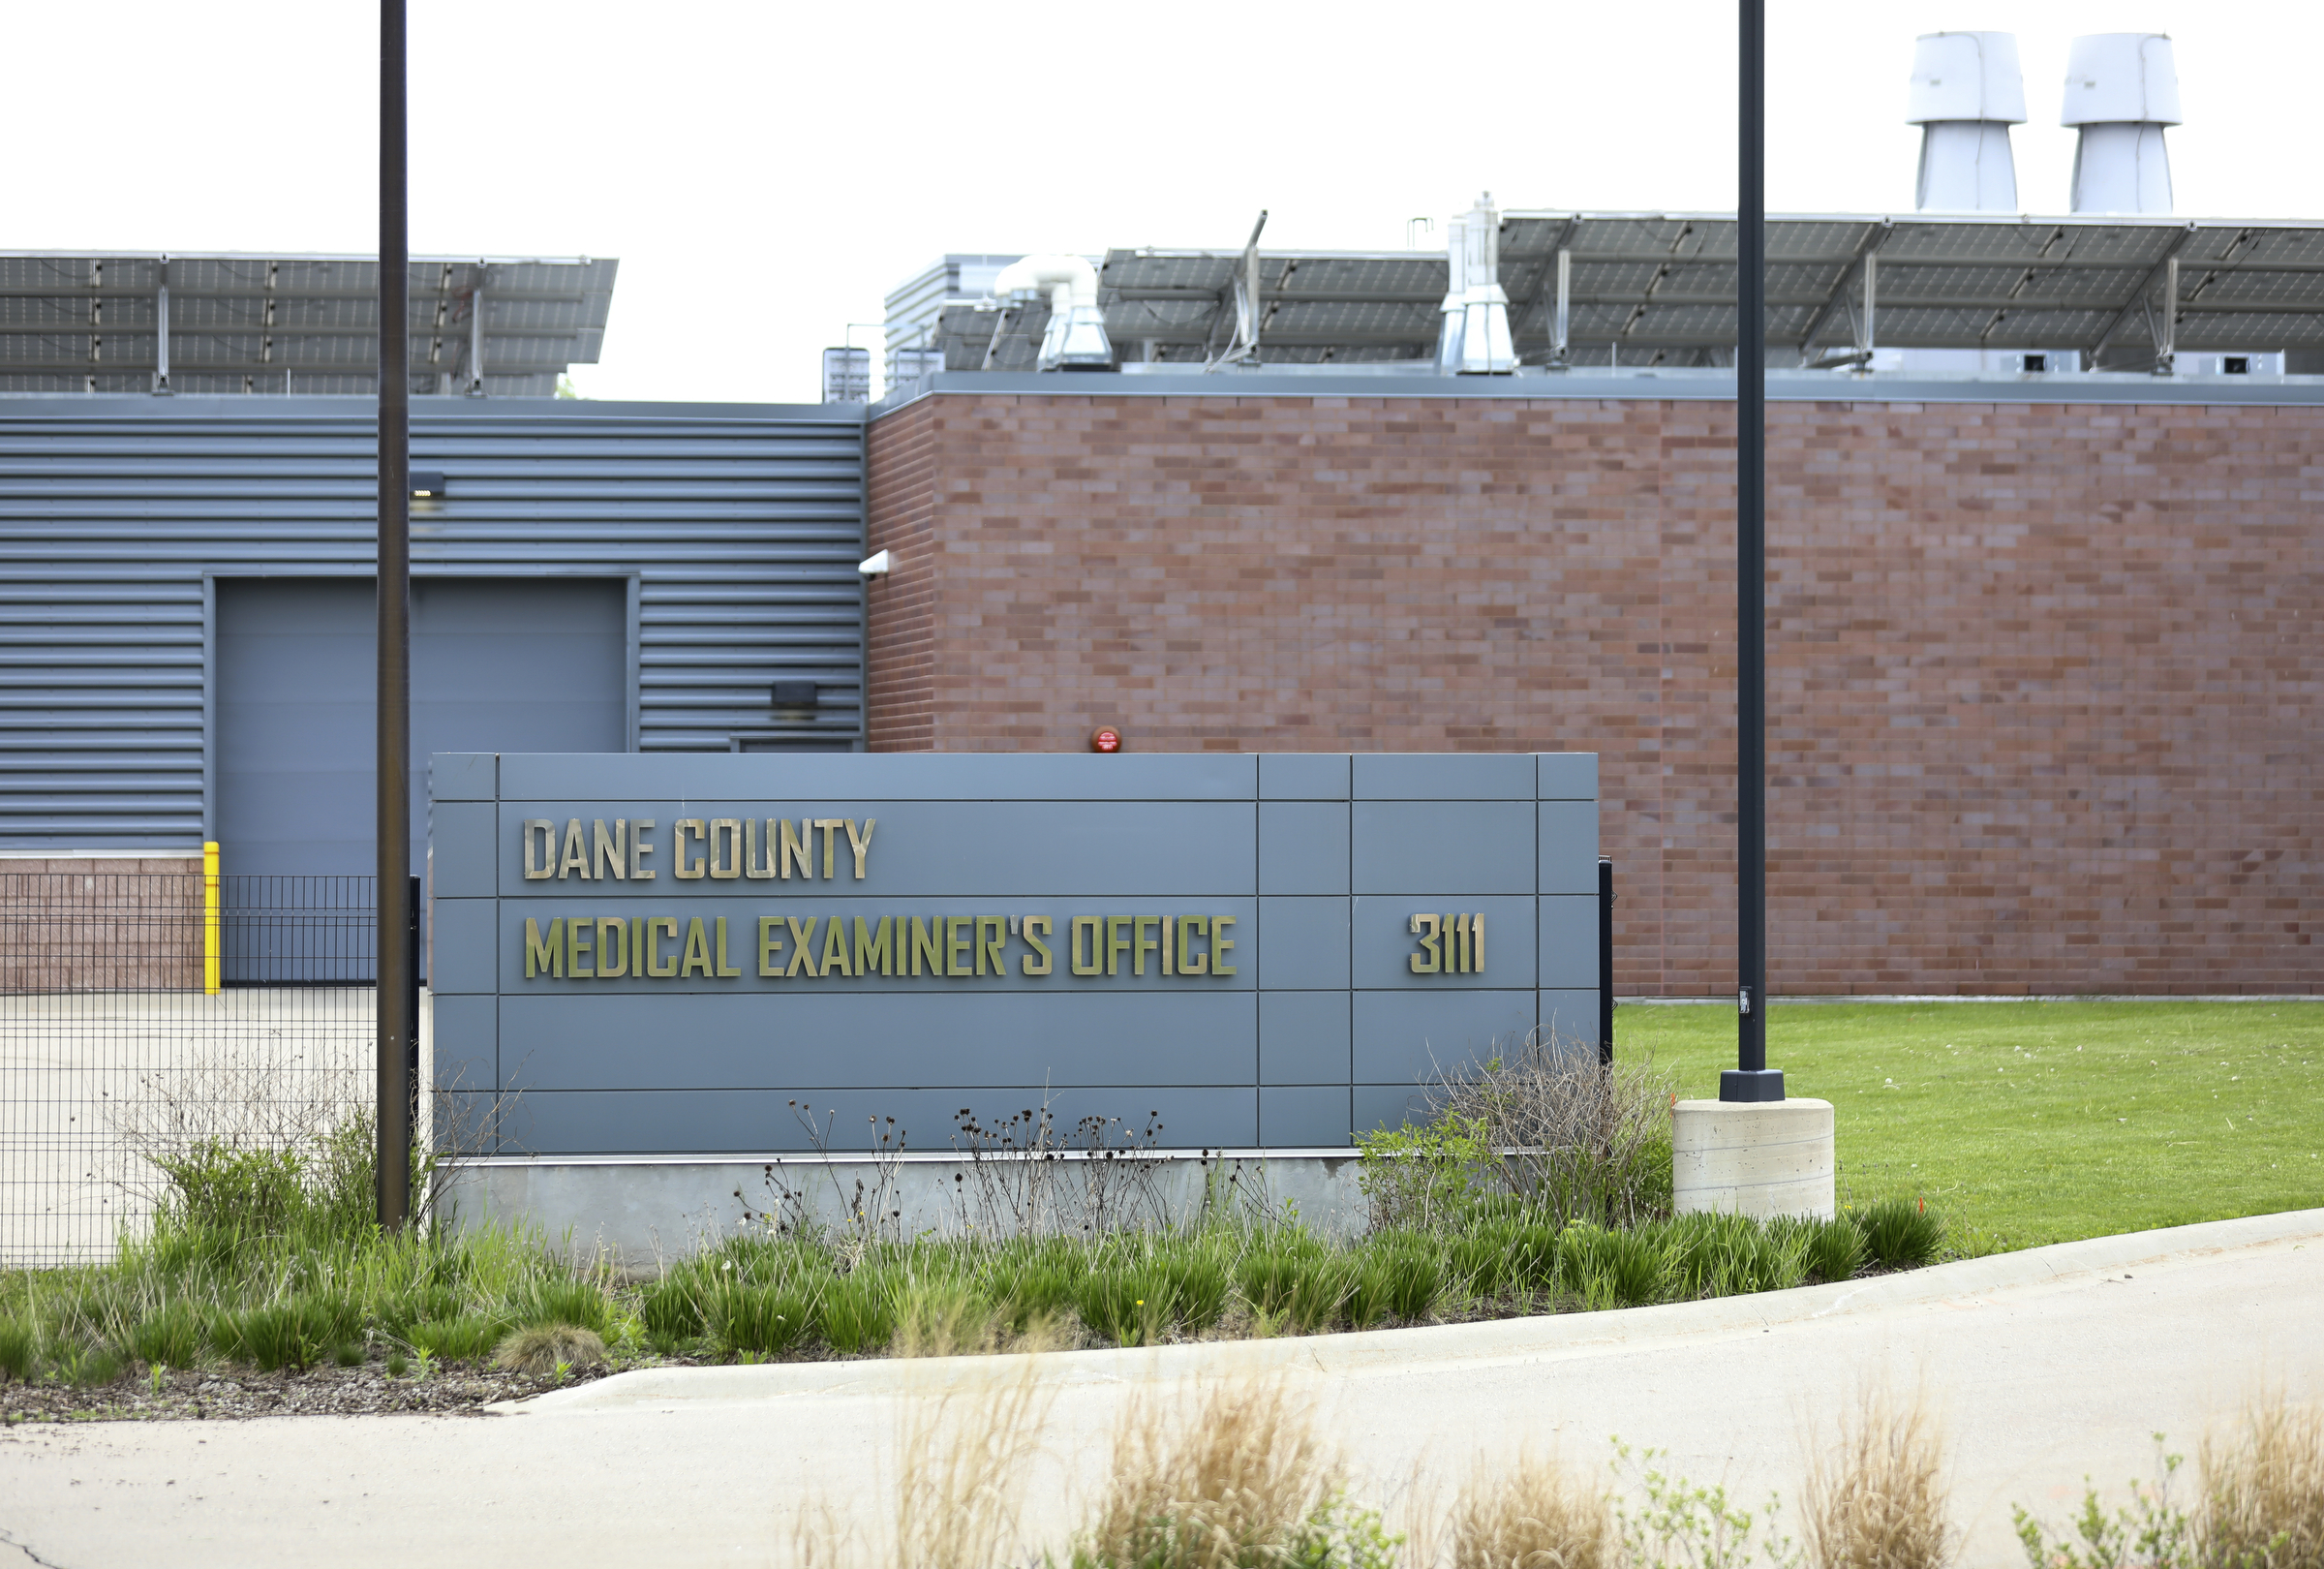 Dane County Medical Examiner’s Office